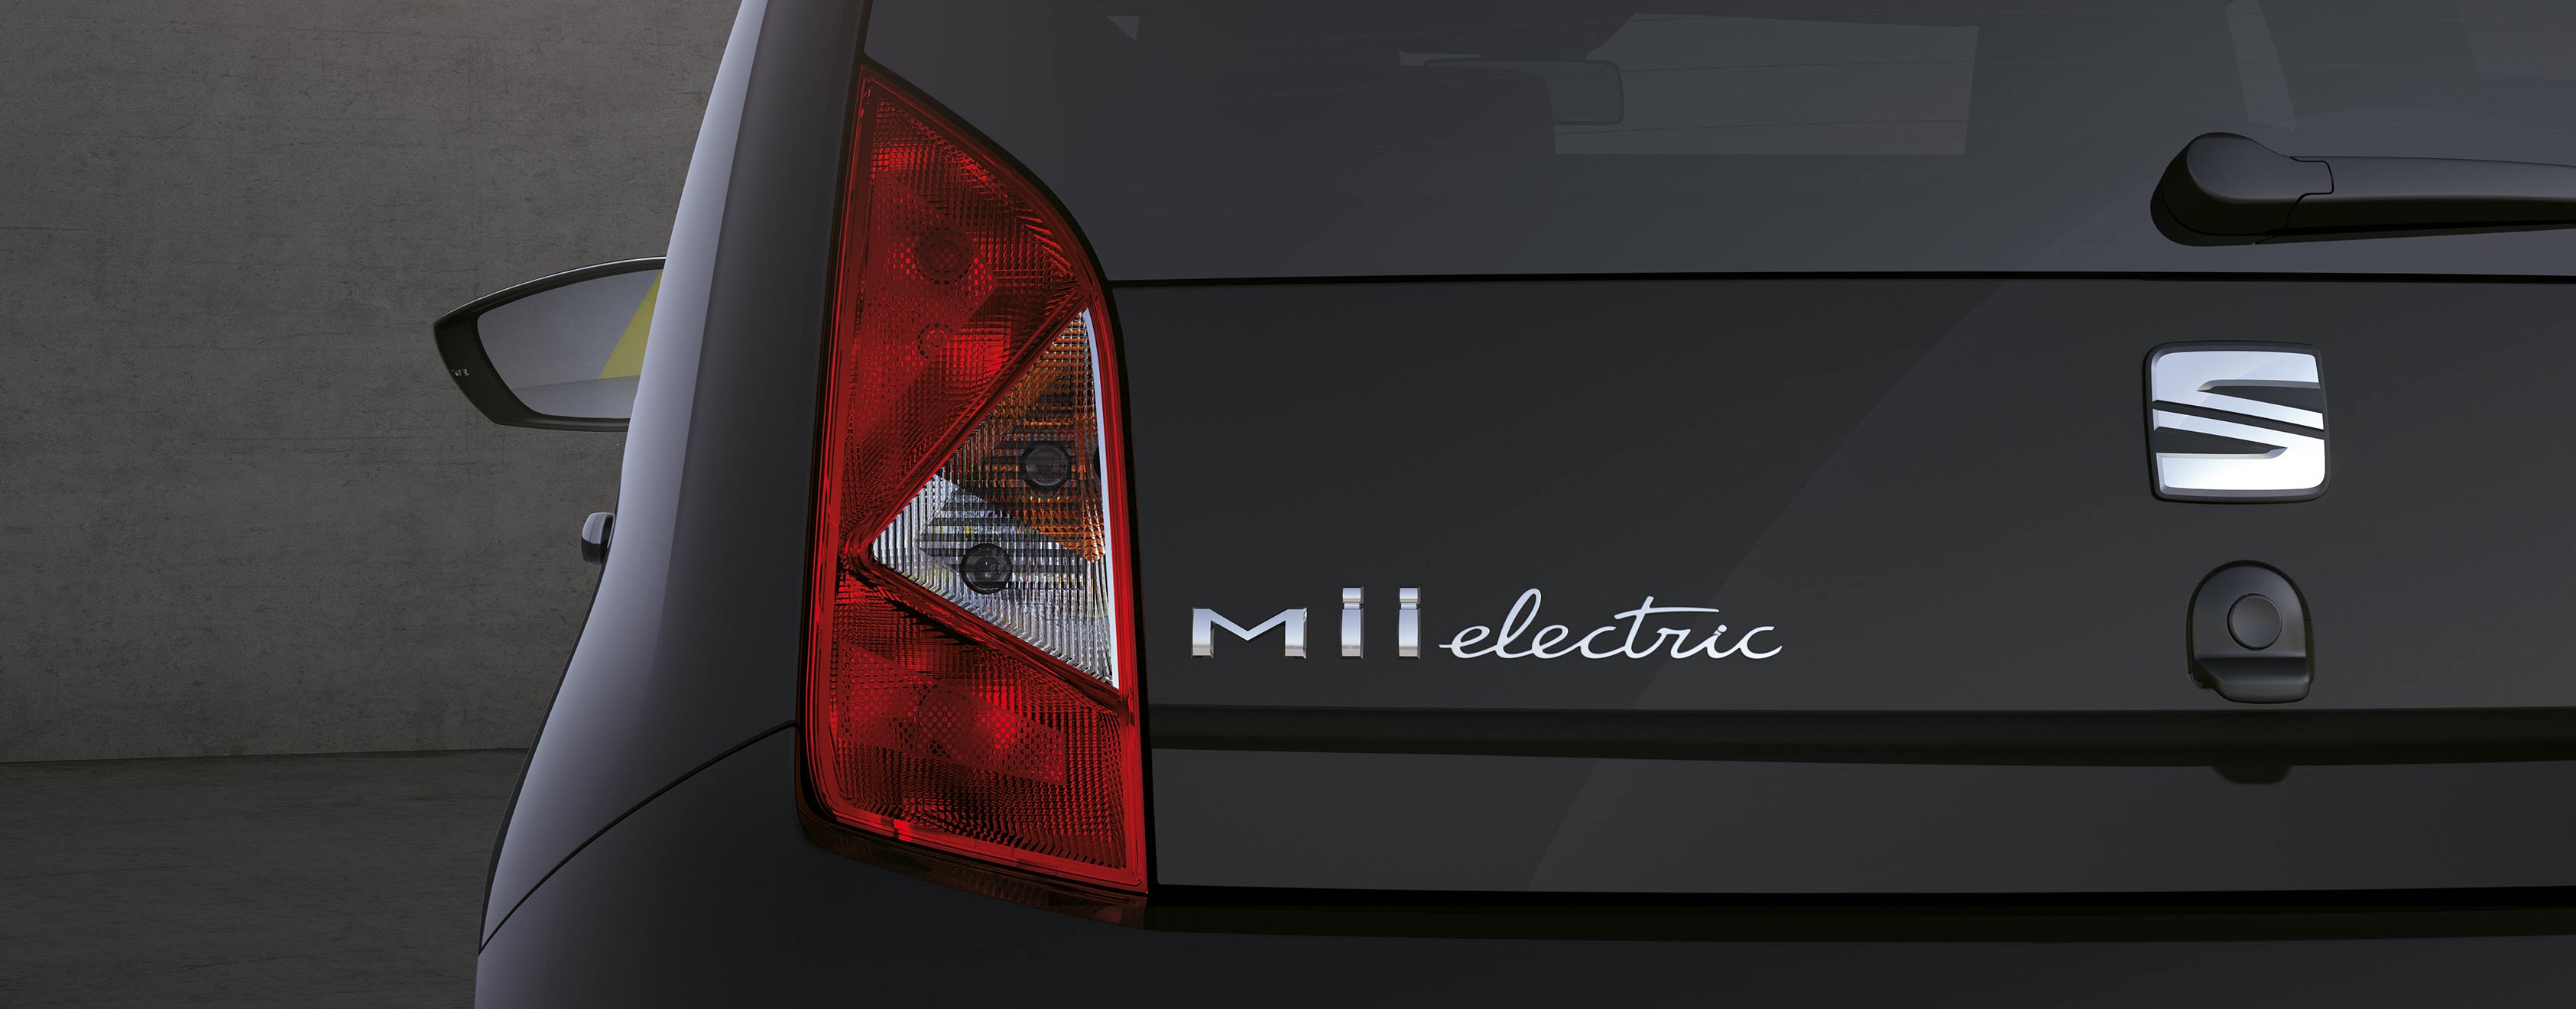 SEAT Mii electric side view with sticker